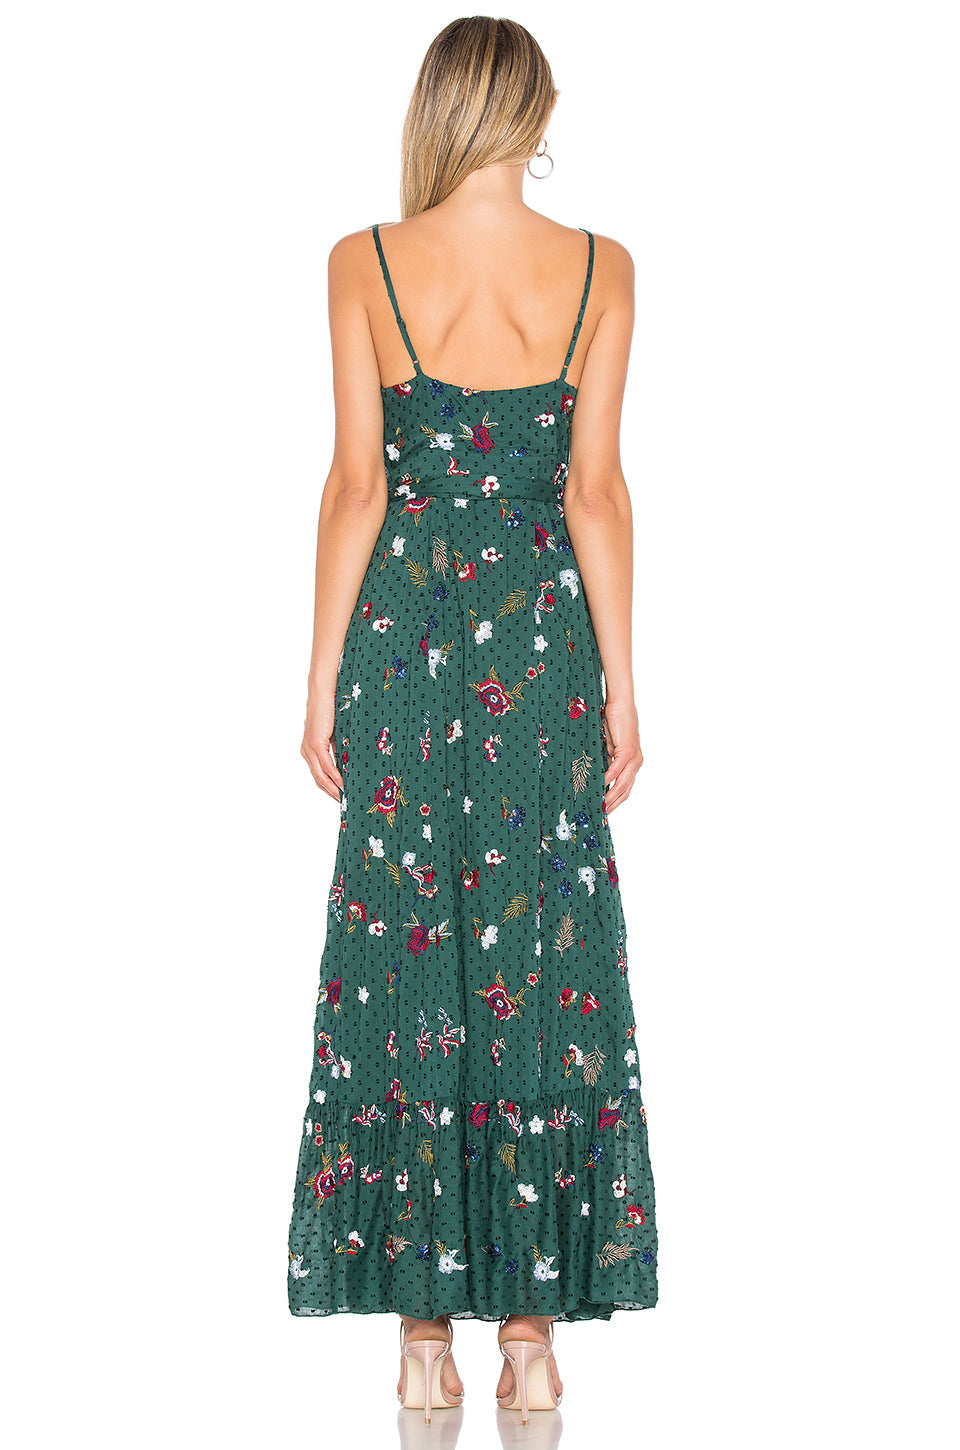 Aubrie Dress in Emerald – TULAROSA (a Revolve Group company)